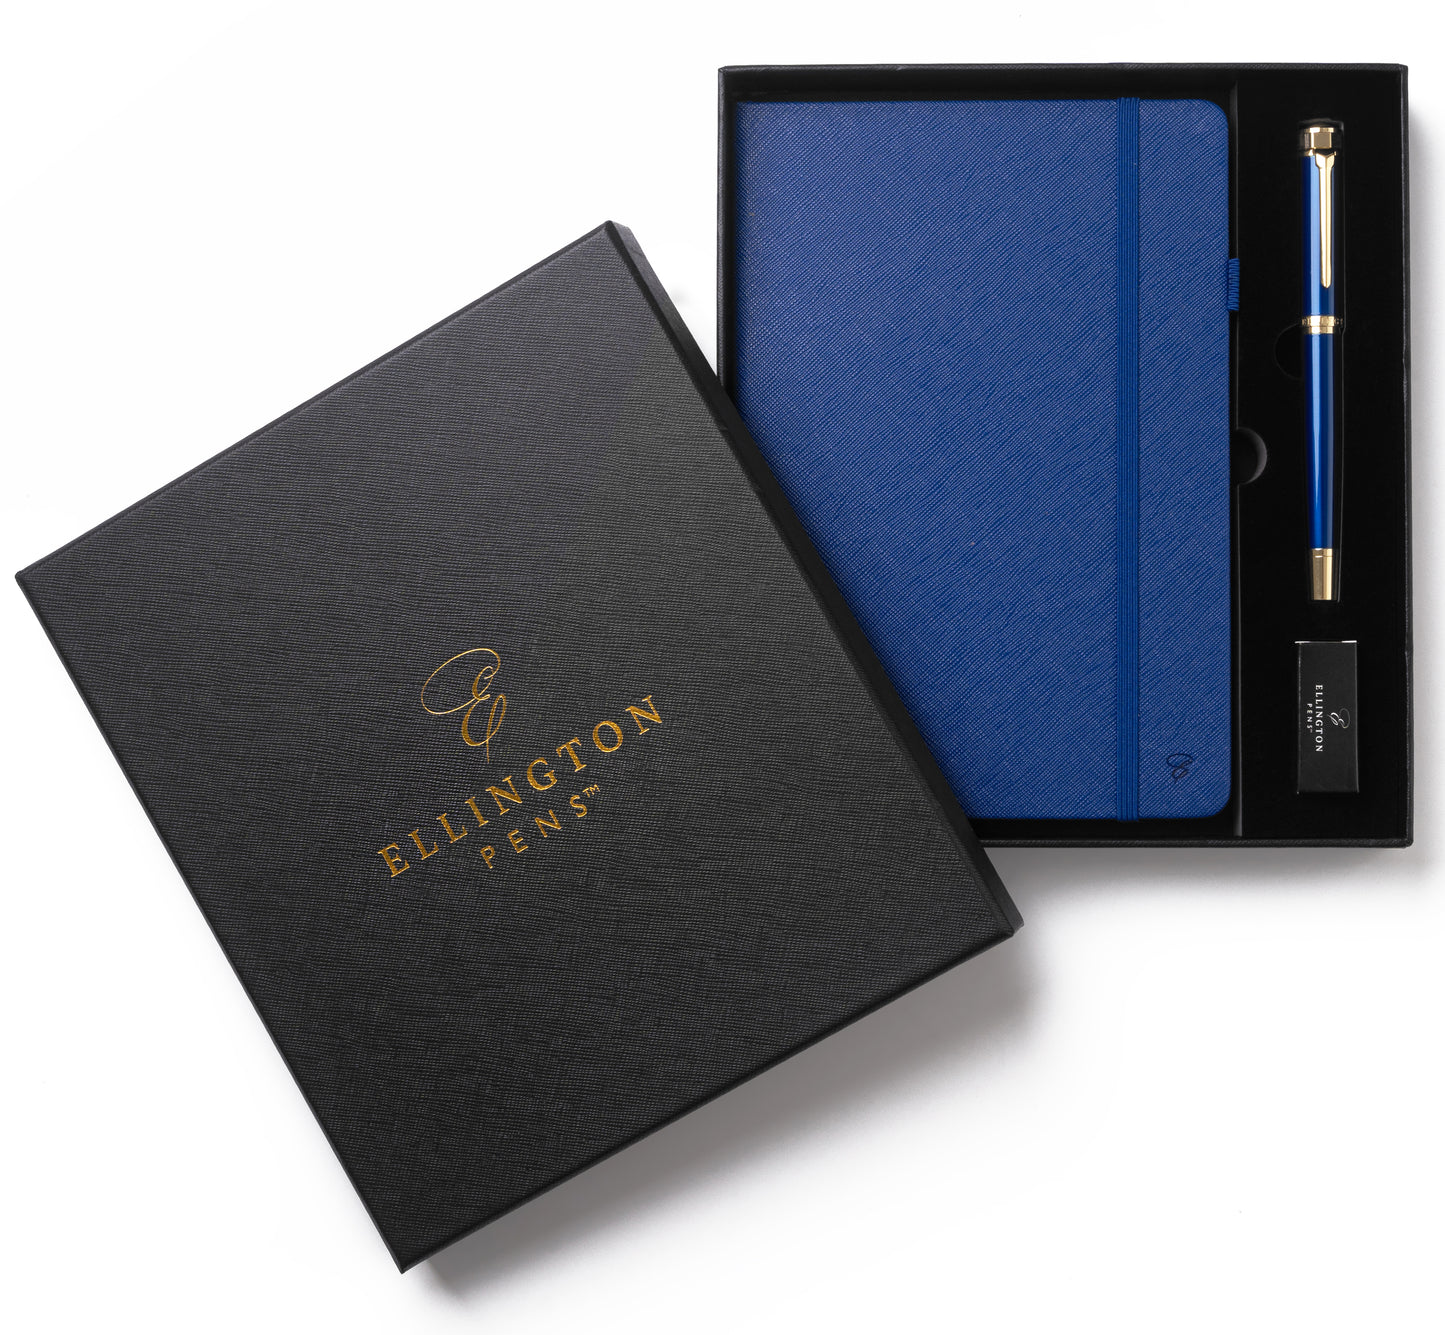 The Nautilus Journal and Pen Gift Set